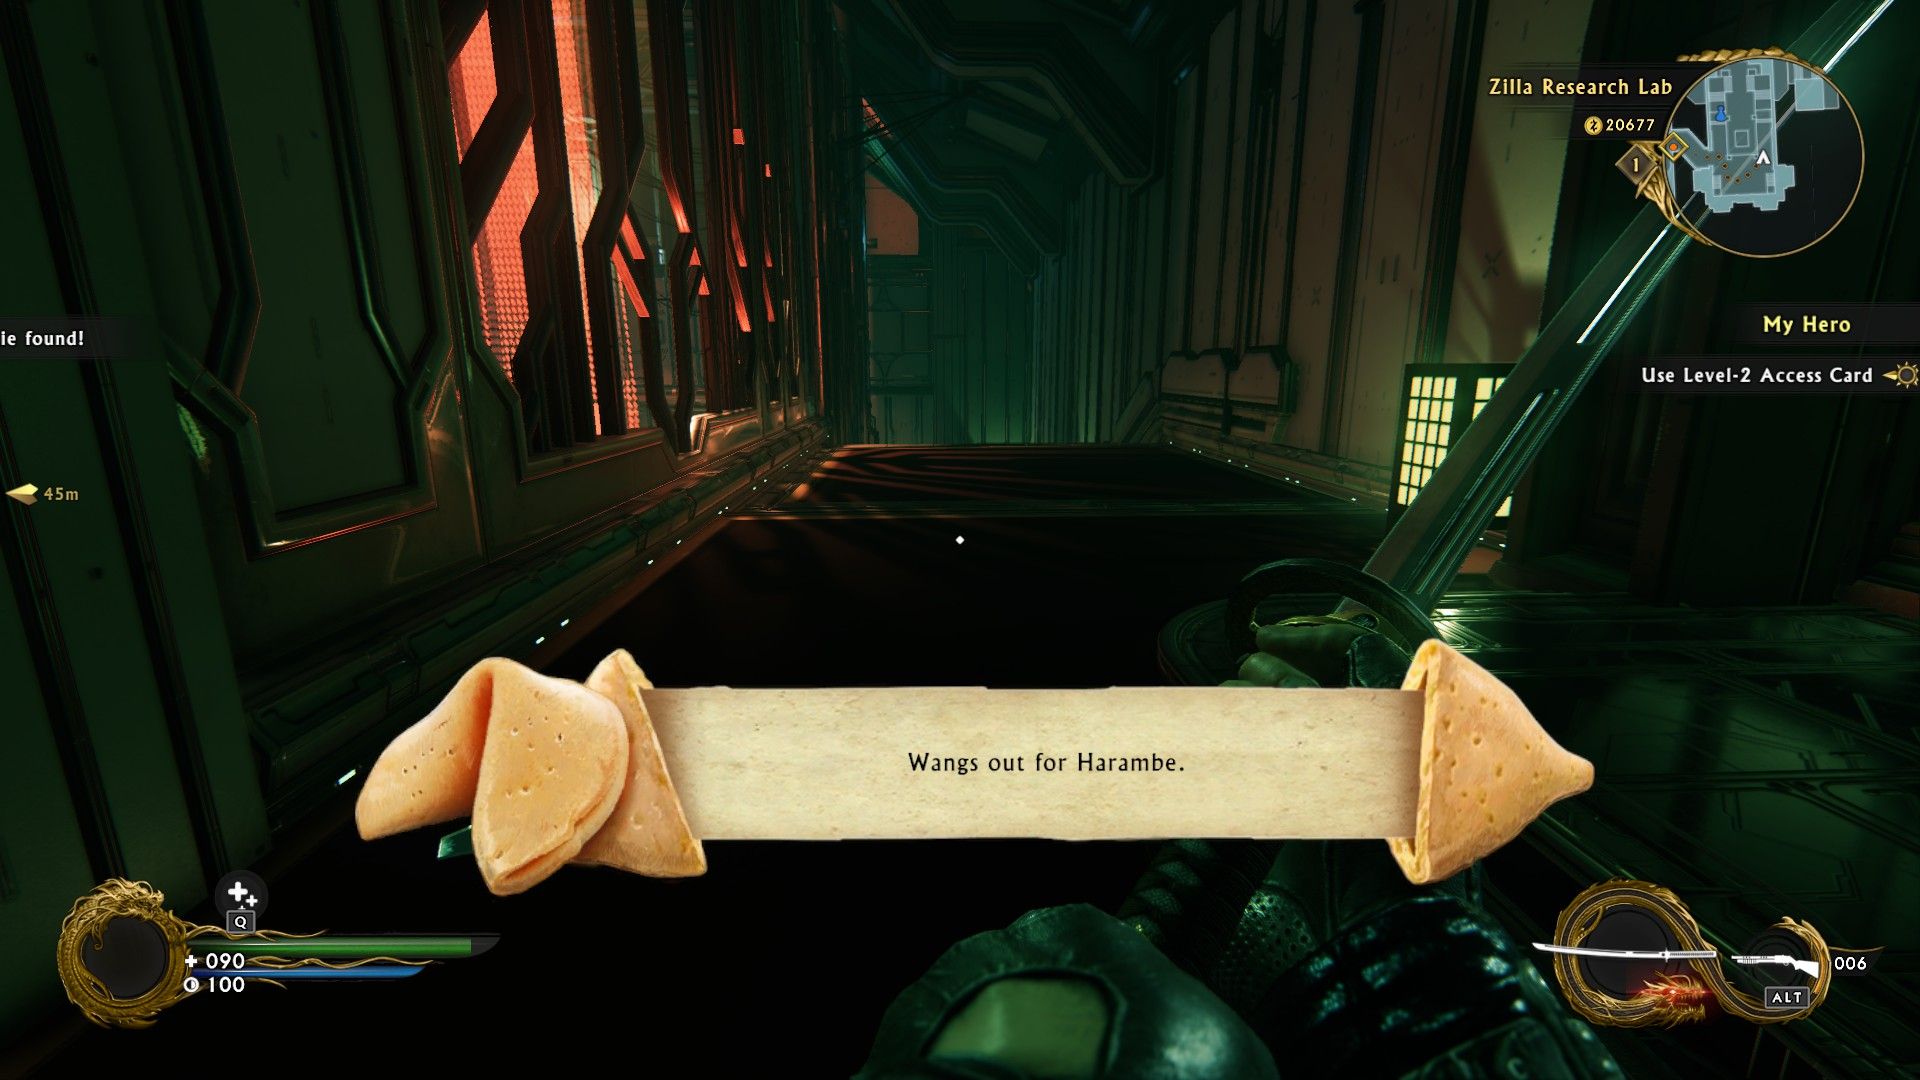 Glad to see fortune cookies in Shadow Warrior 2 are up to date with the latest memes.